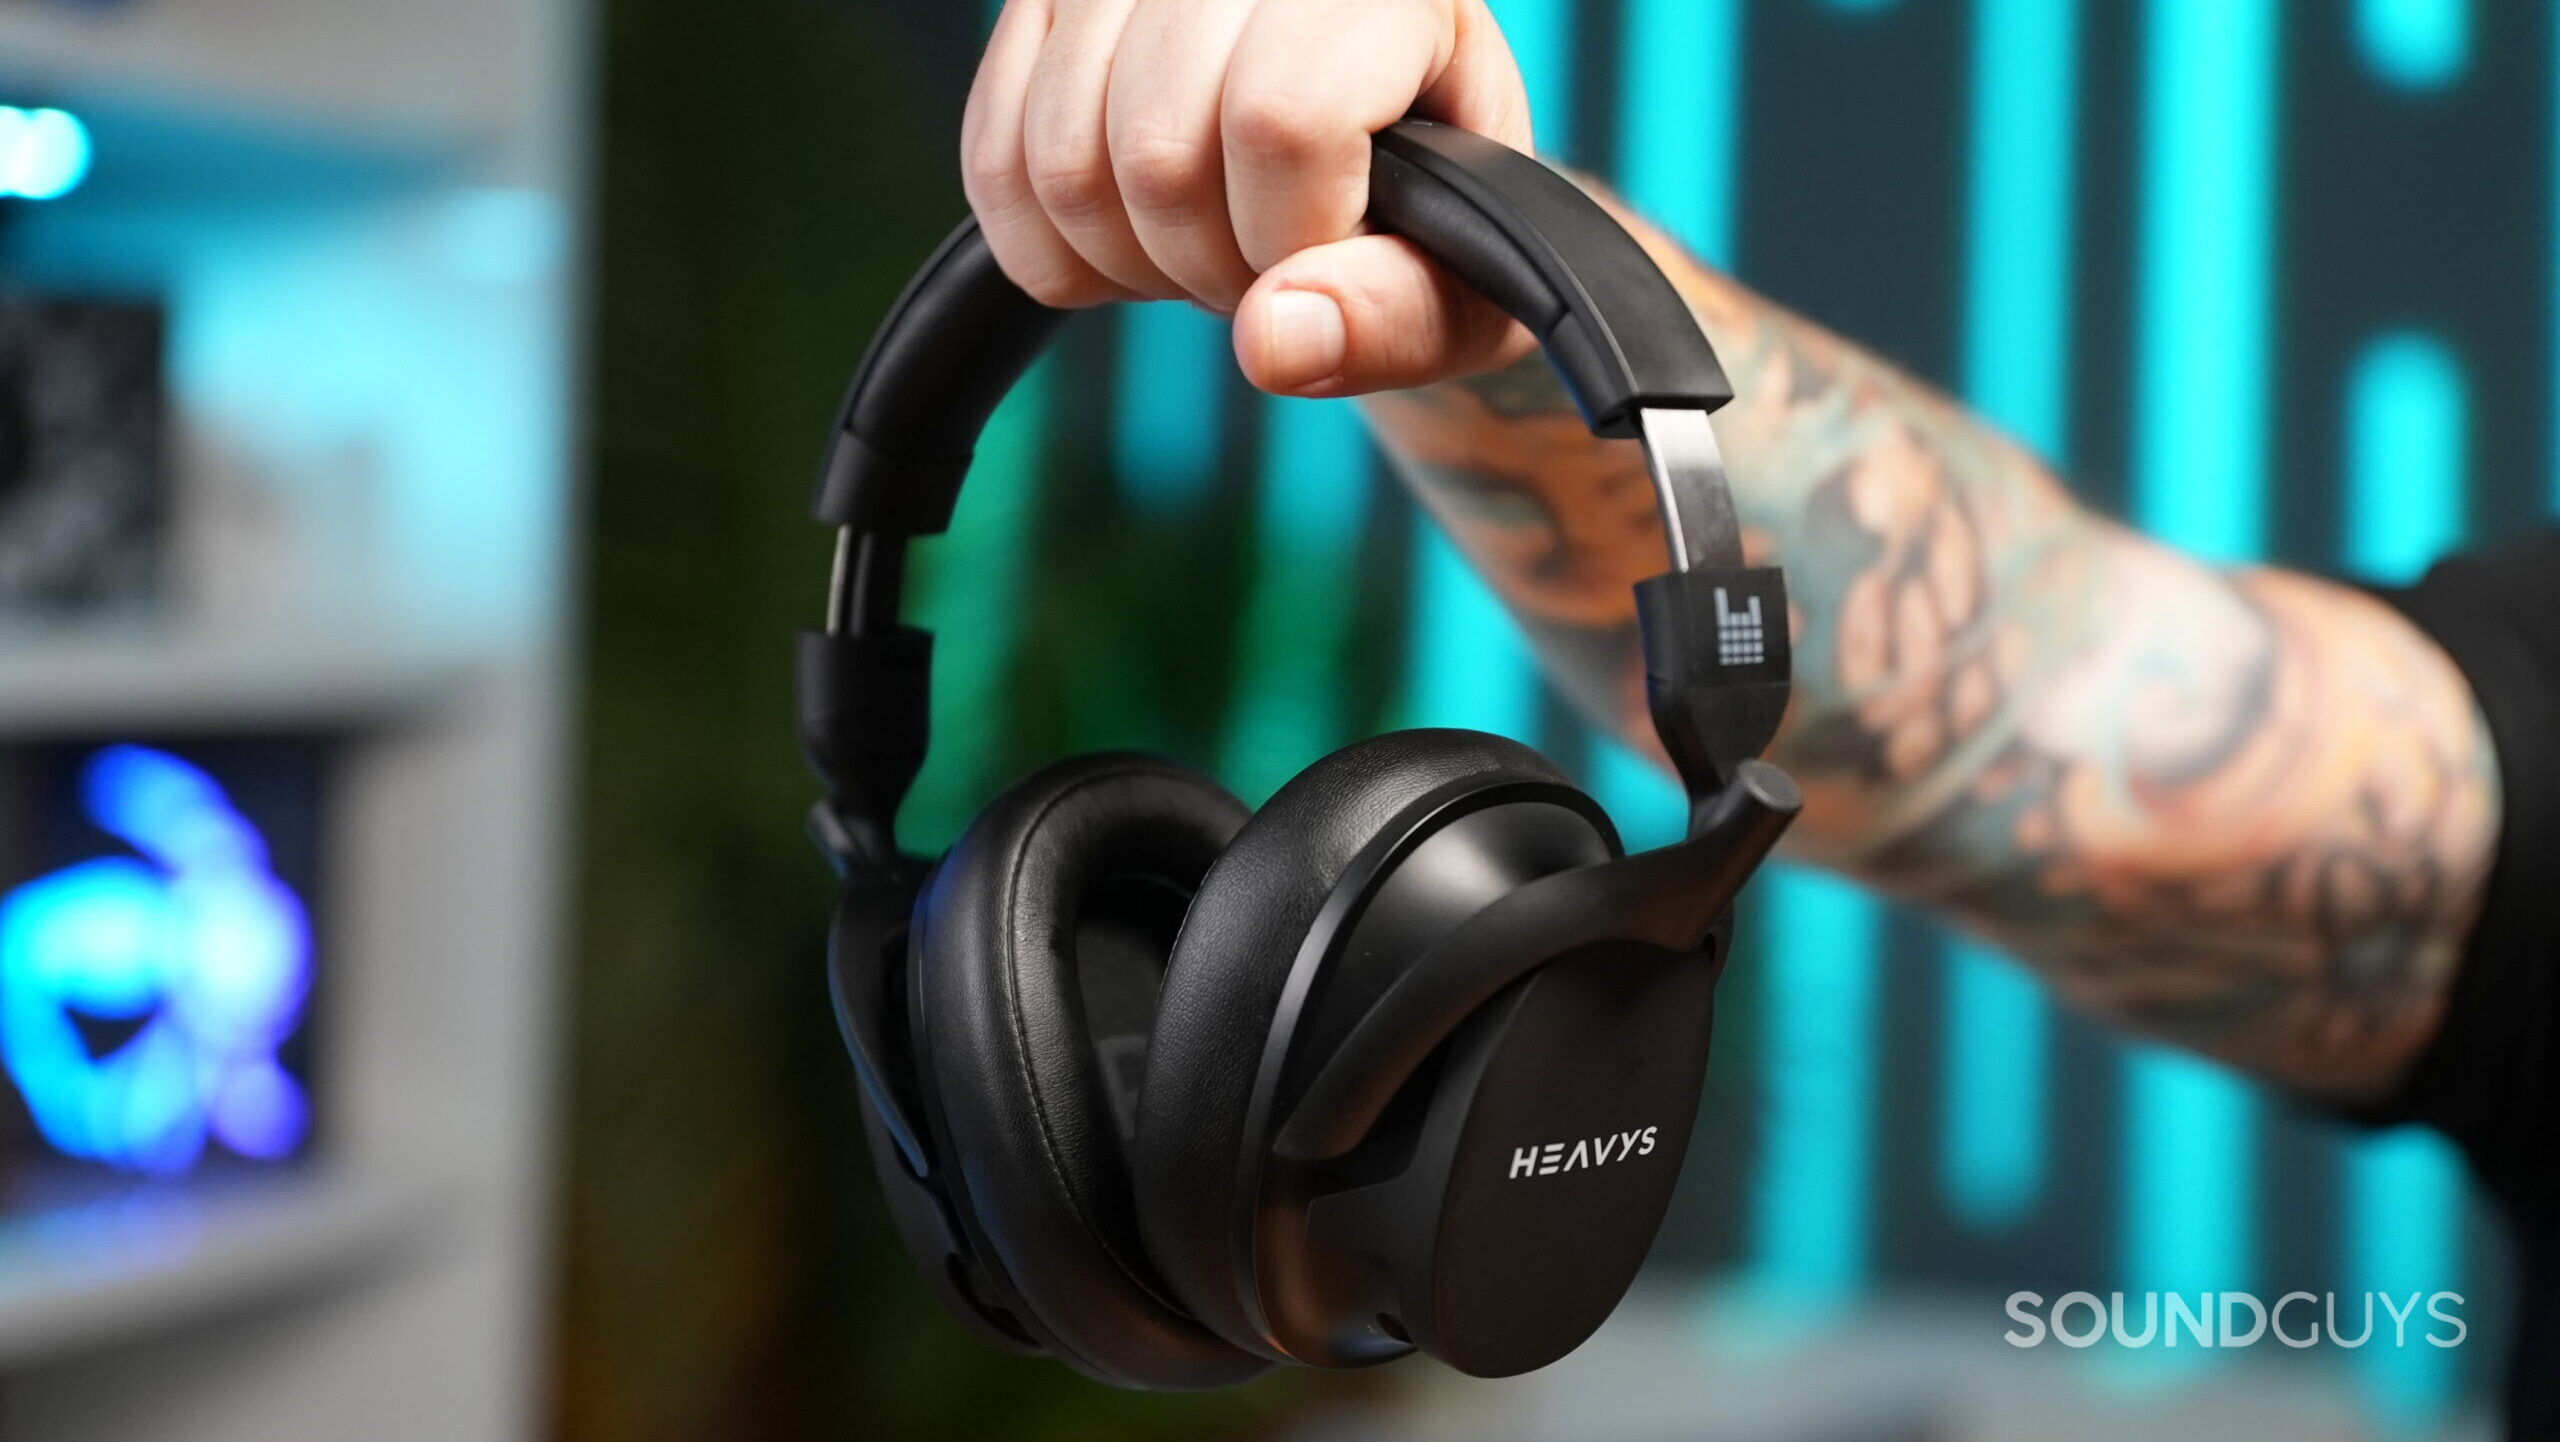 A hand holding the Heavy H1H headphones by the headband.